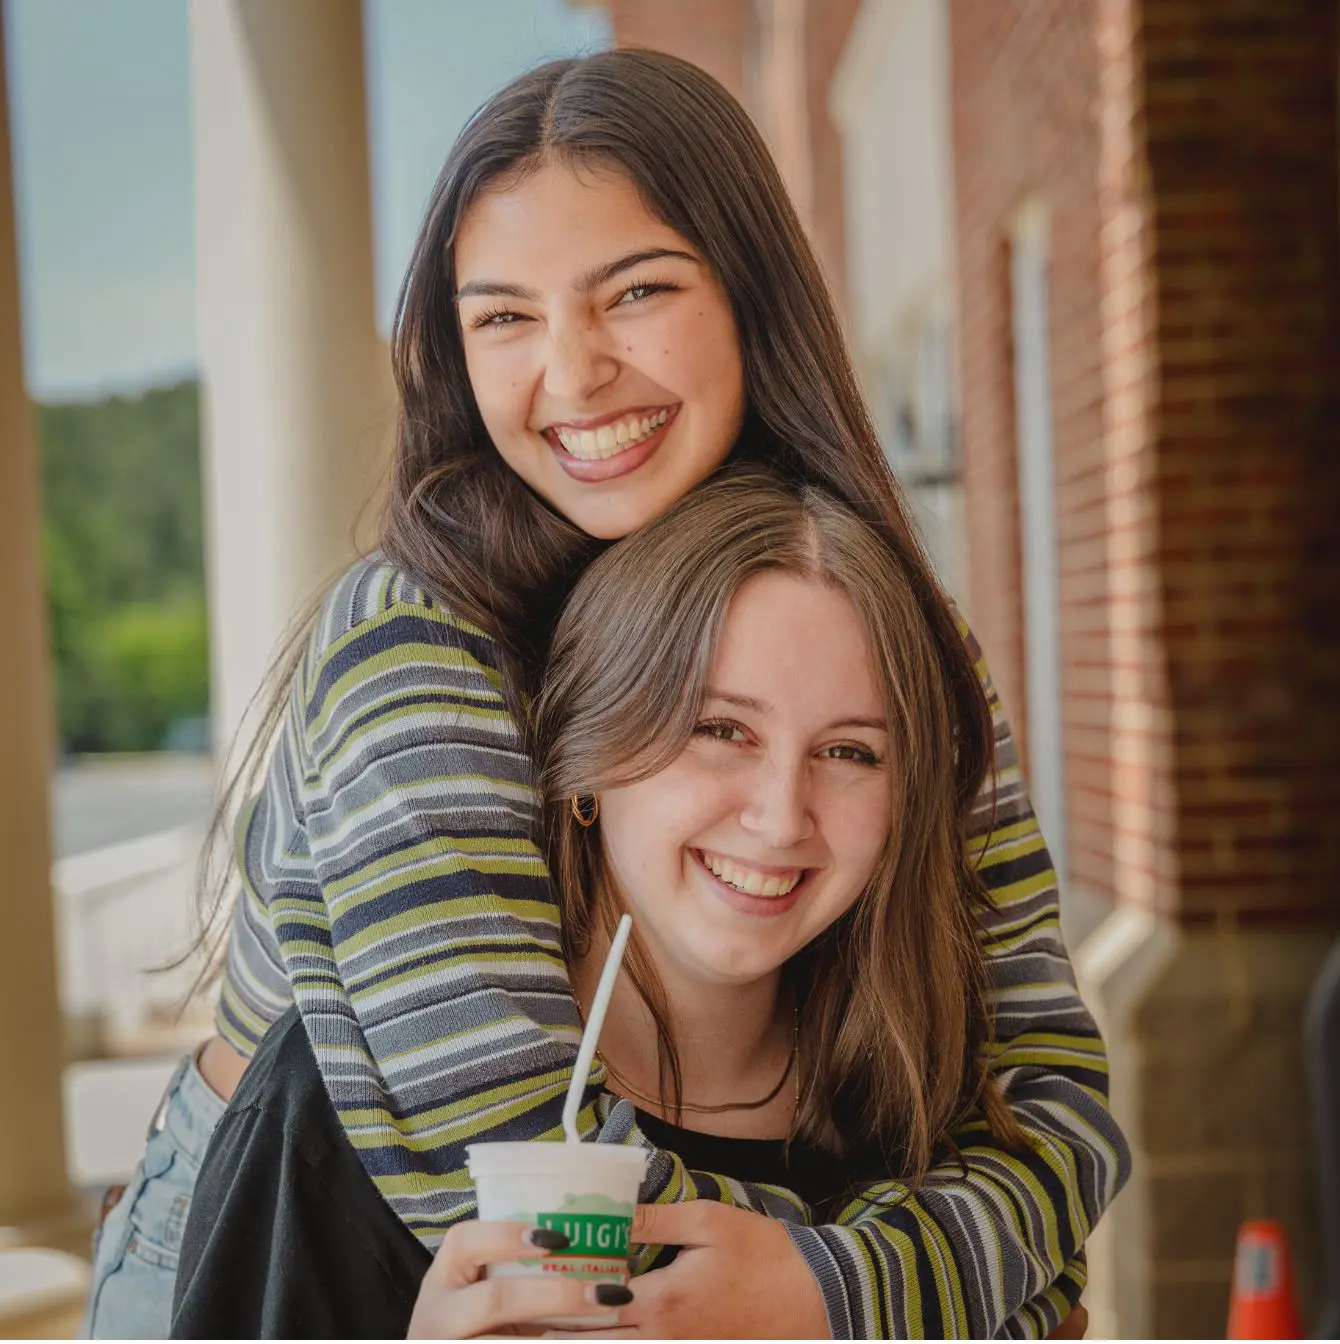 Two Trinity high school friends share a joyful hug and laughter on a sunny day; one is holding a refreshing snack, adding to the casual and happy atmosphere of their outdoor moment.